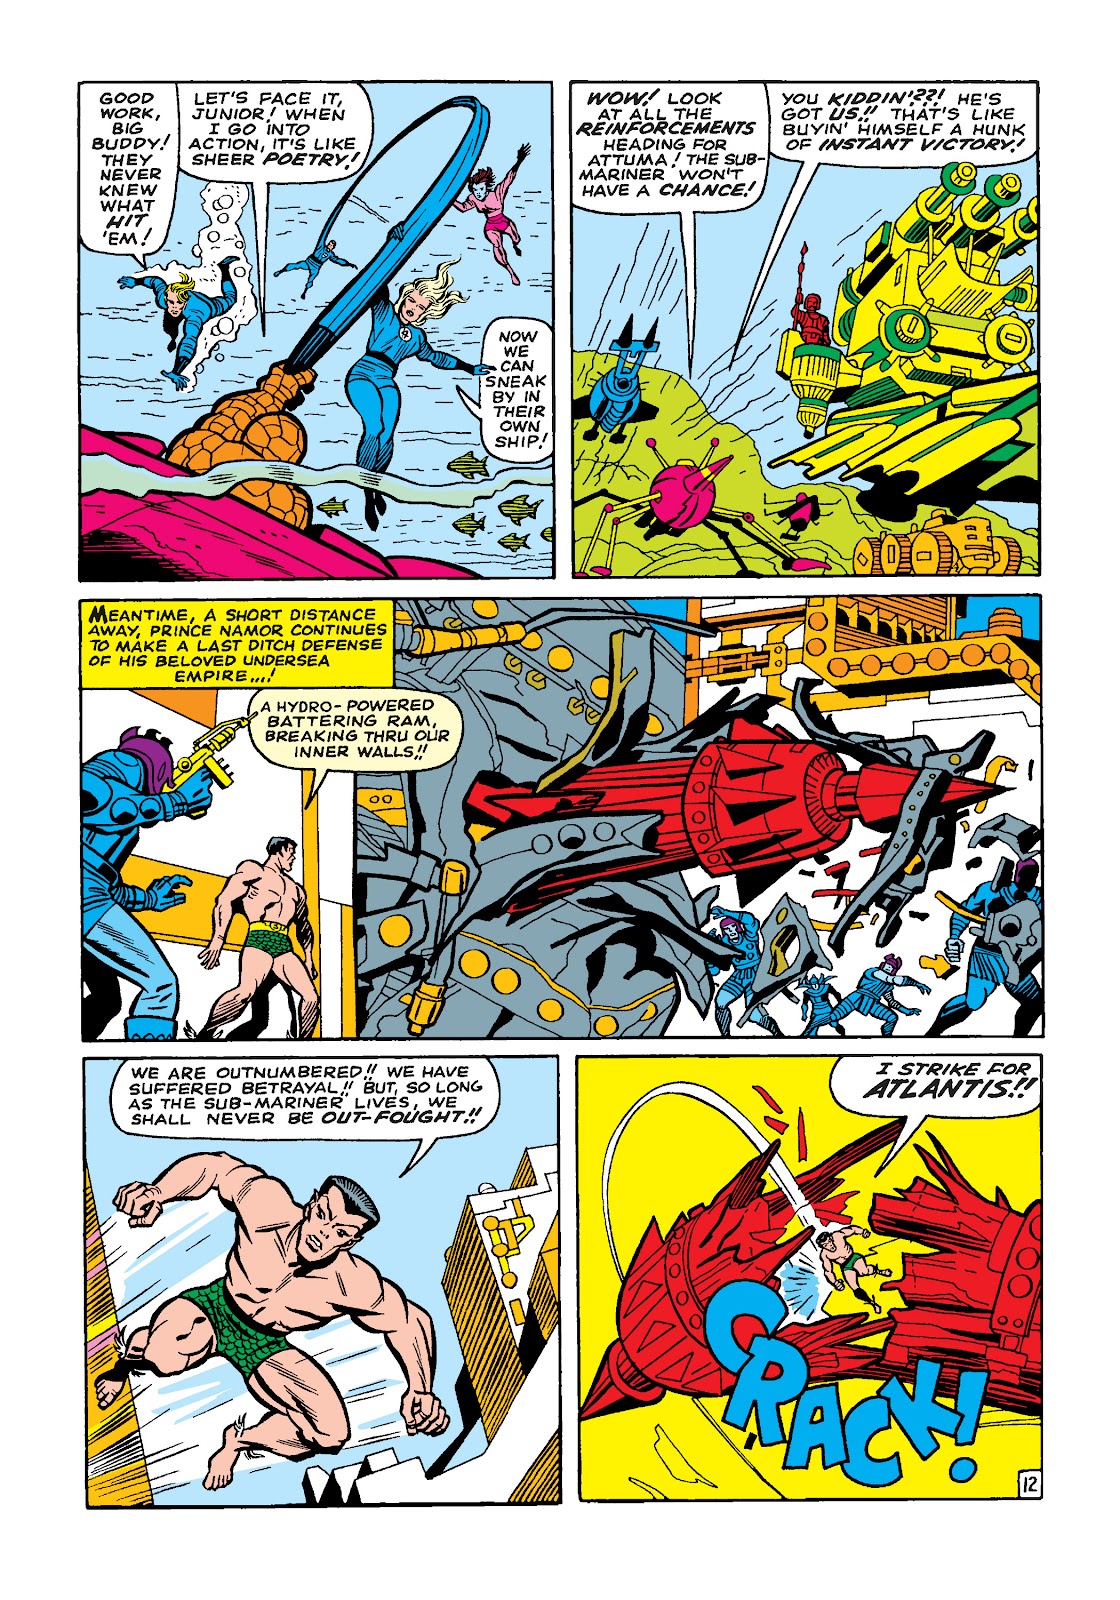 Read online Marvel Masterworks: The Fantastic Four comic - Issue # TPB 4 (Part 2) - 12